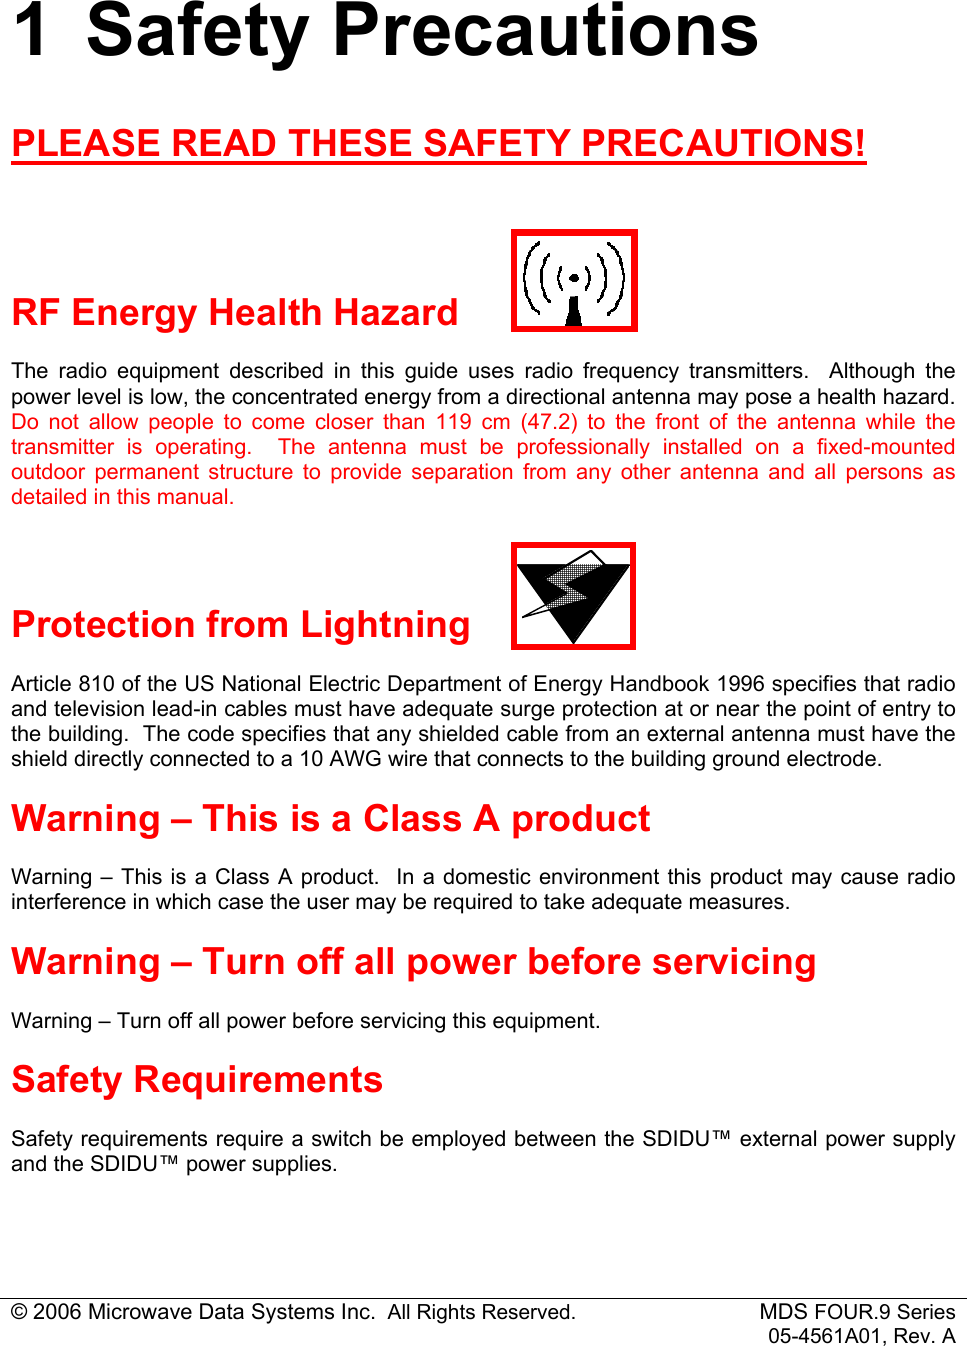 © 2006 Microwave Data Systems Inc.  All Rights Reserved. MDS FOUR.9 Series 05-4561A01, Rev. A 1 Safety Precautions PLEASE READ THESE SAFETY PRECAUTIONS!   RF Energy Health Hazard The radio equipment described in this guide uses radio frequency transmitters.  Although the power level is low, the concentrated energy from a directional antenna may pose a health hazard.  Do not allow people to come closer than 119 cm (47.2) to the front of the antenna while the transmitter is operating.  The antenna must be professionally installed on a fixed-mounted outdoor permanent structure to provide separation from any other antenna and all persons as detailed in this manual.  Protection from Lightning Article 810 of the US National Electric Department of Energy Handbook 1996 specifies that radio and television lead-in cables must have adequate surge protection at or near the point of entry to the building.  The code specifies that any shielded cable from an external antenna must have the shield directly connected to a 10 AWG wire that connects to the building ground electrode. Warning – This is a Class A product Warning – This is a Class A product.  In a domestic environment this product may cause radio interference in which case the user may be required to take adequate measures. Warning – Turn off all power before servicing Warning – Turn off all power before servicing this equipment. Safety Requirements Safety requirements require a switch be employed between the SDIDU™ external power supply and the SDIDU™ power supplies. 